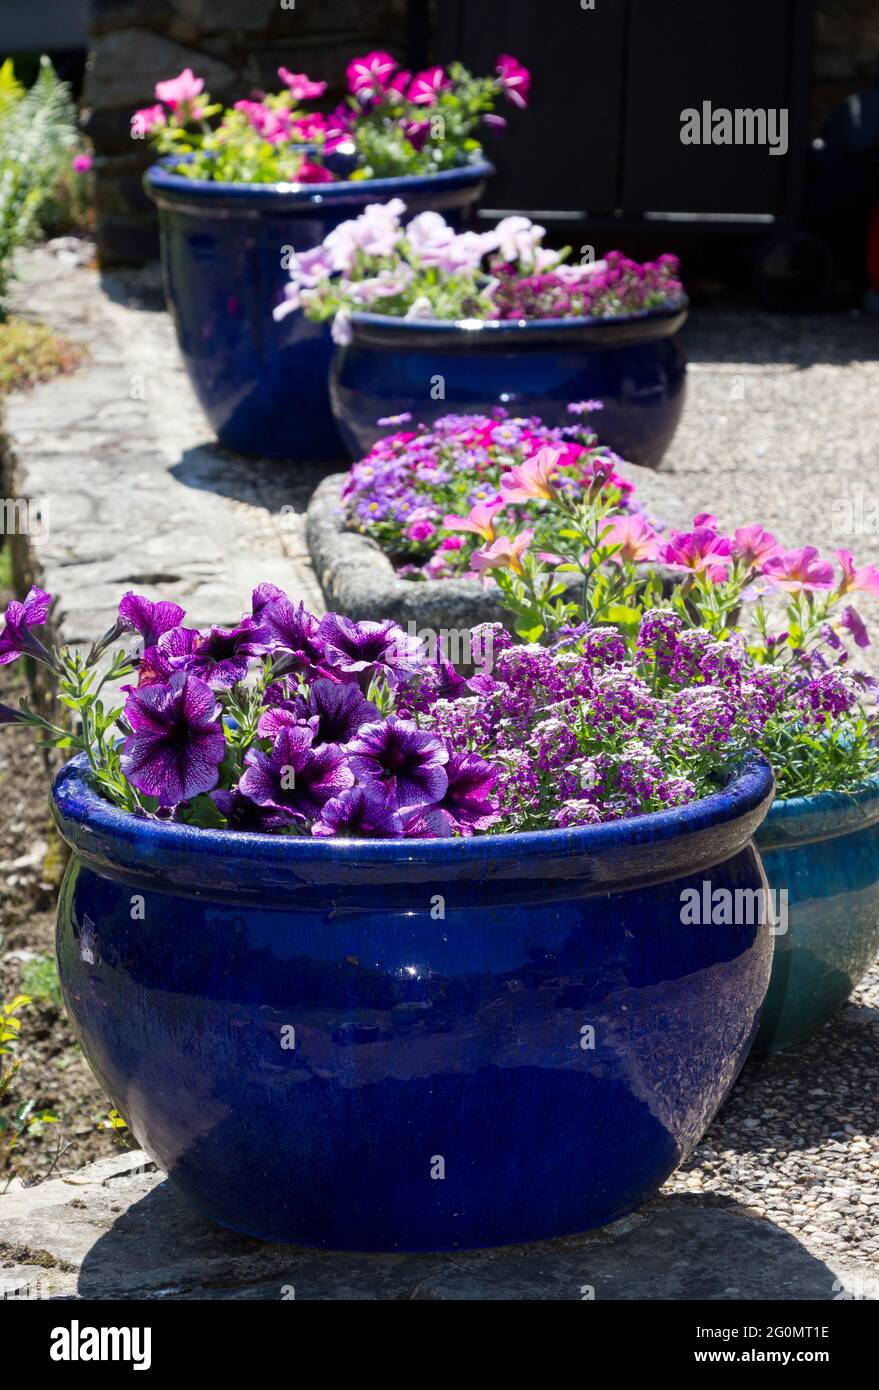 Summer bedding plants in a pot Stock Photo